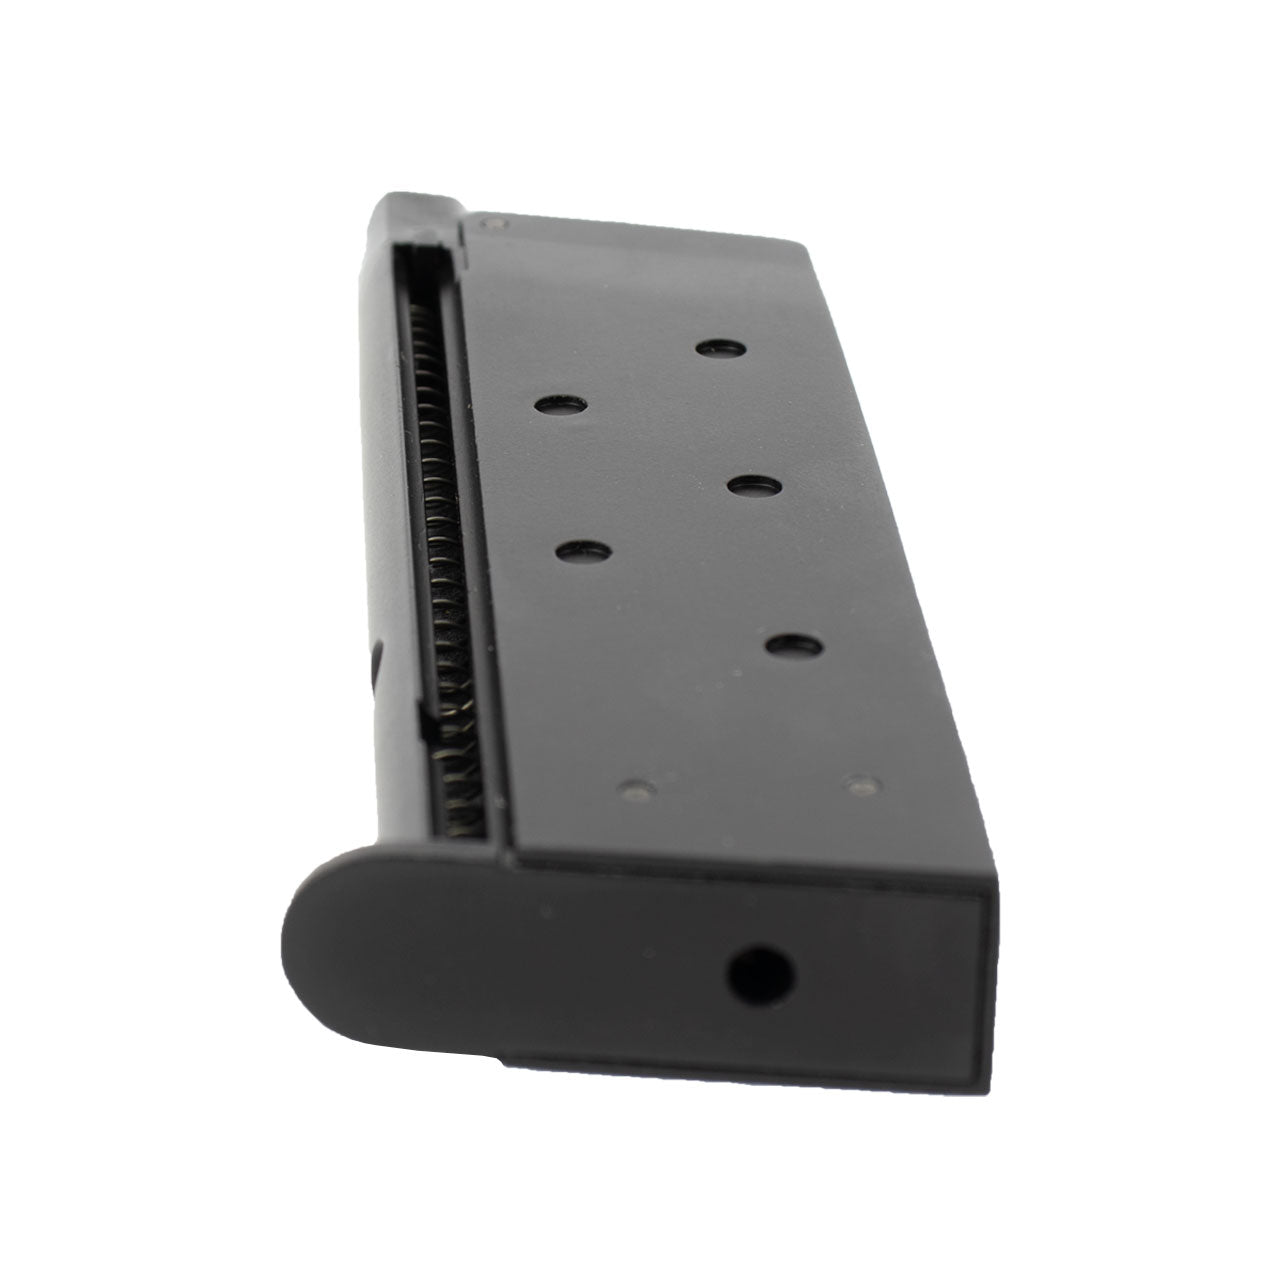 1911 Single Stack Gas Magazine for NE10 Series Gas Blowback Airsoft Pistols